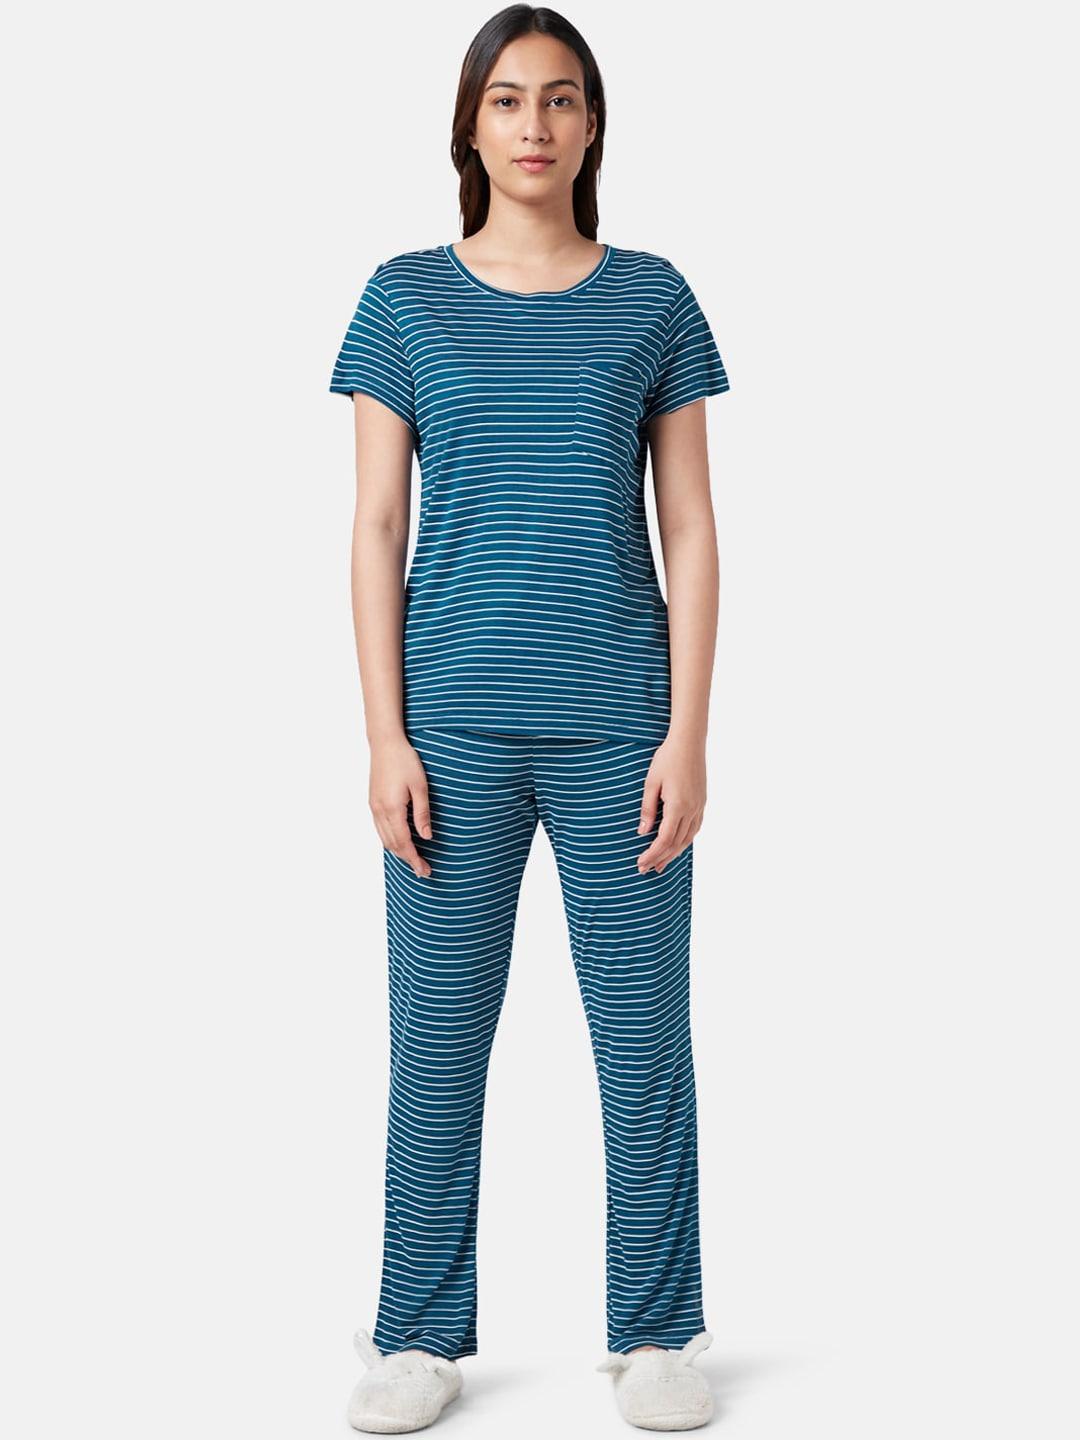 dreamz-by-pantaloons-striped-night-suit